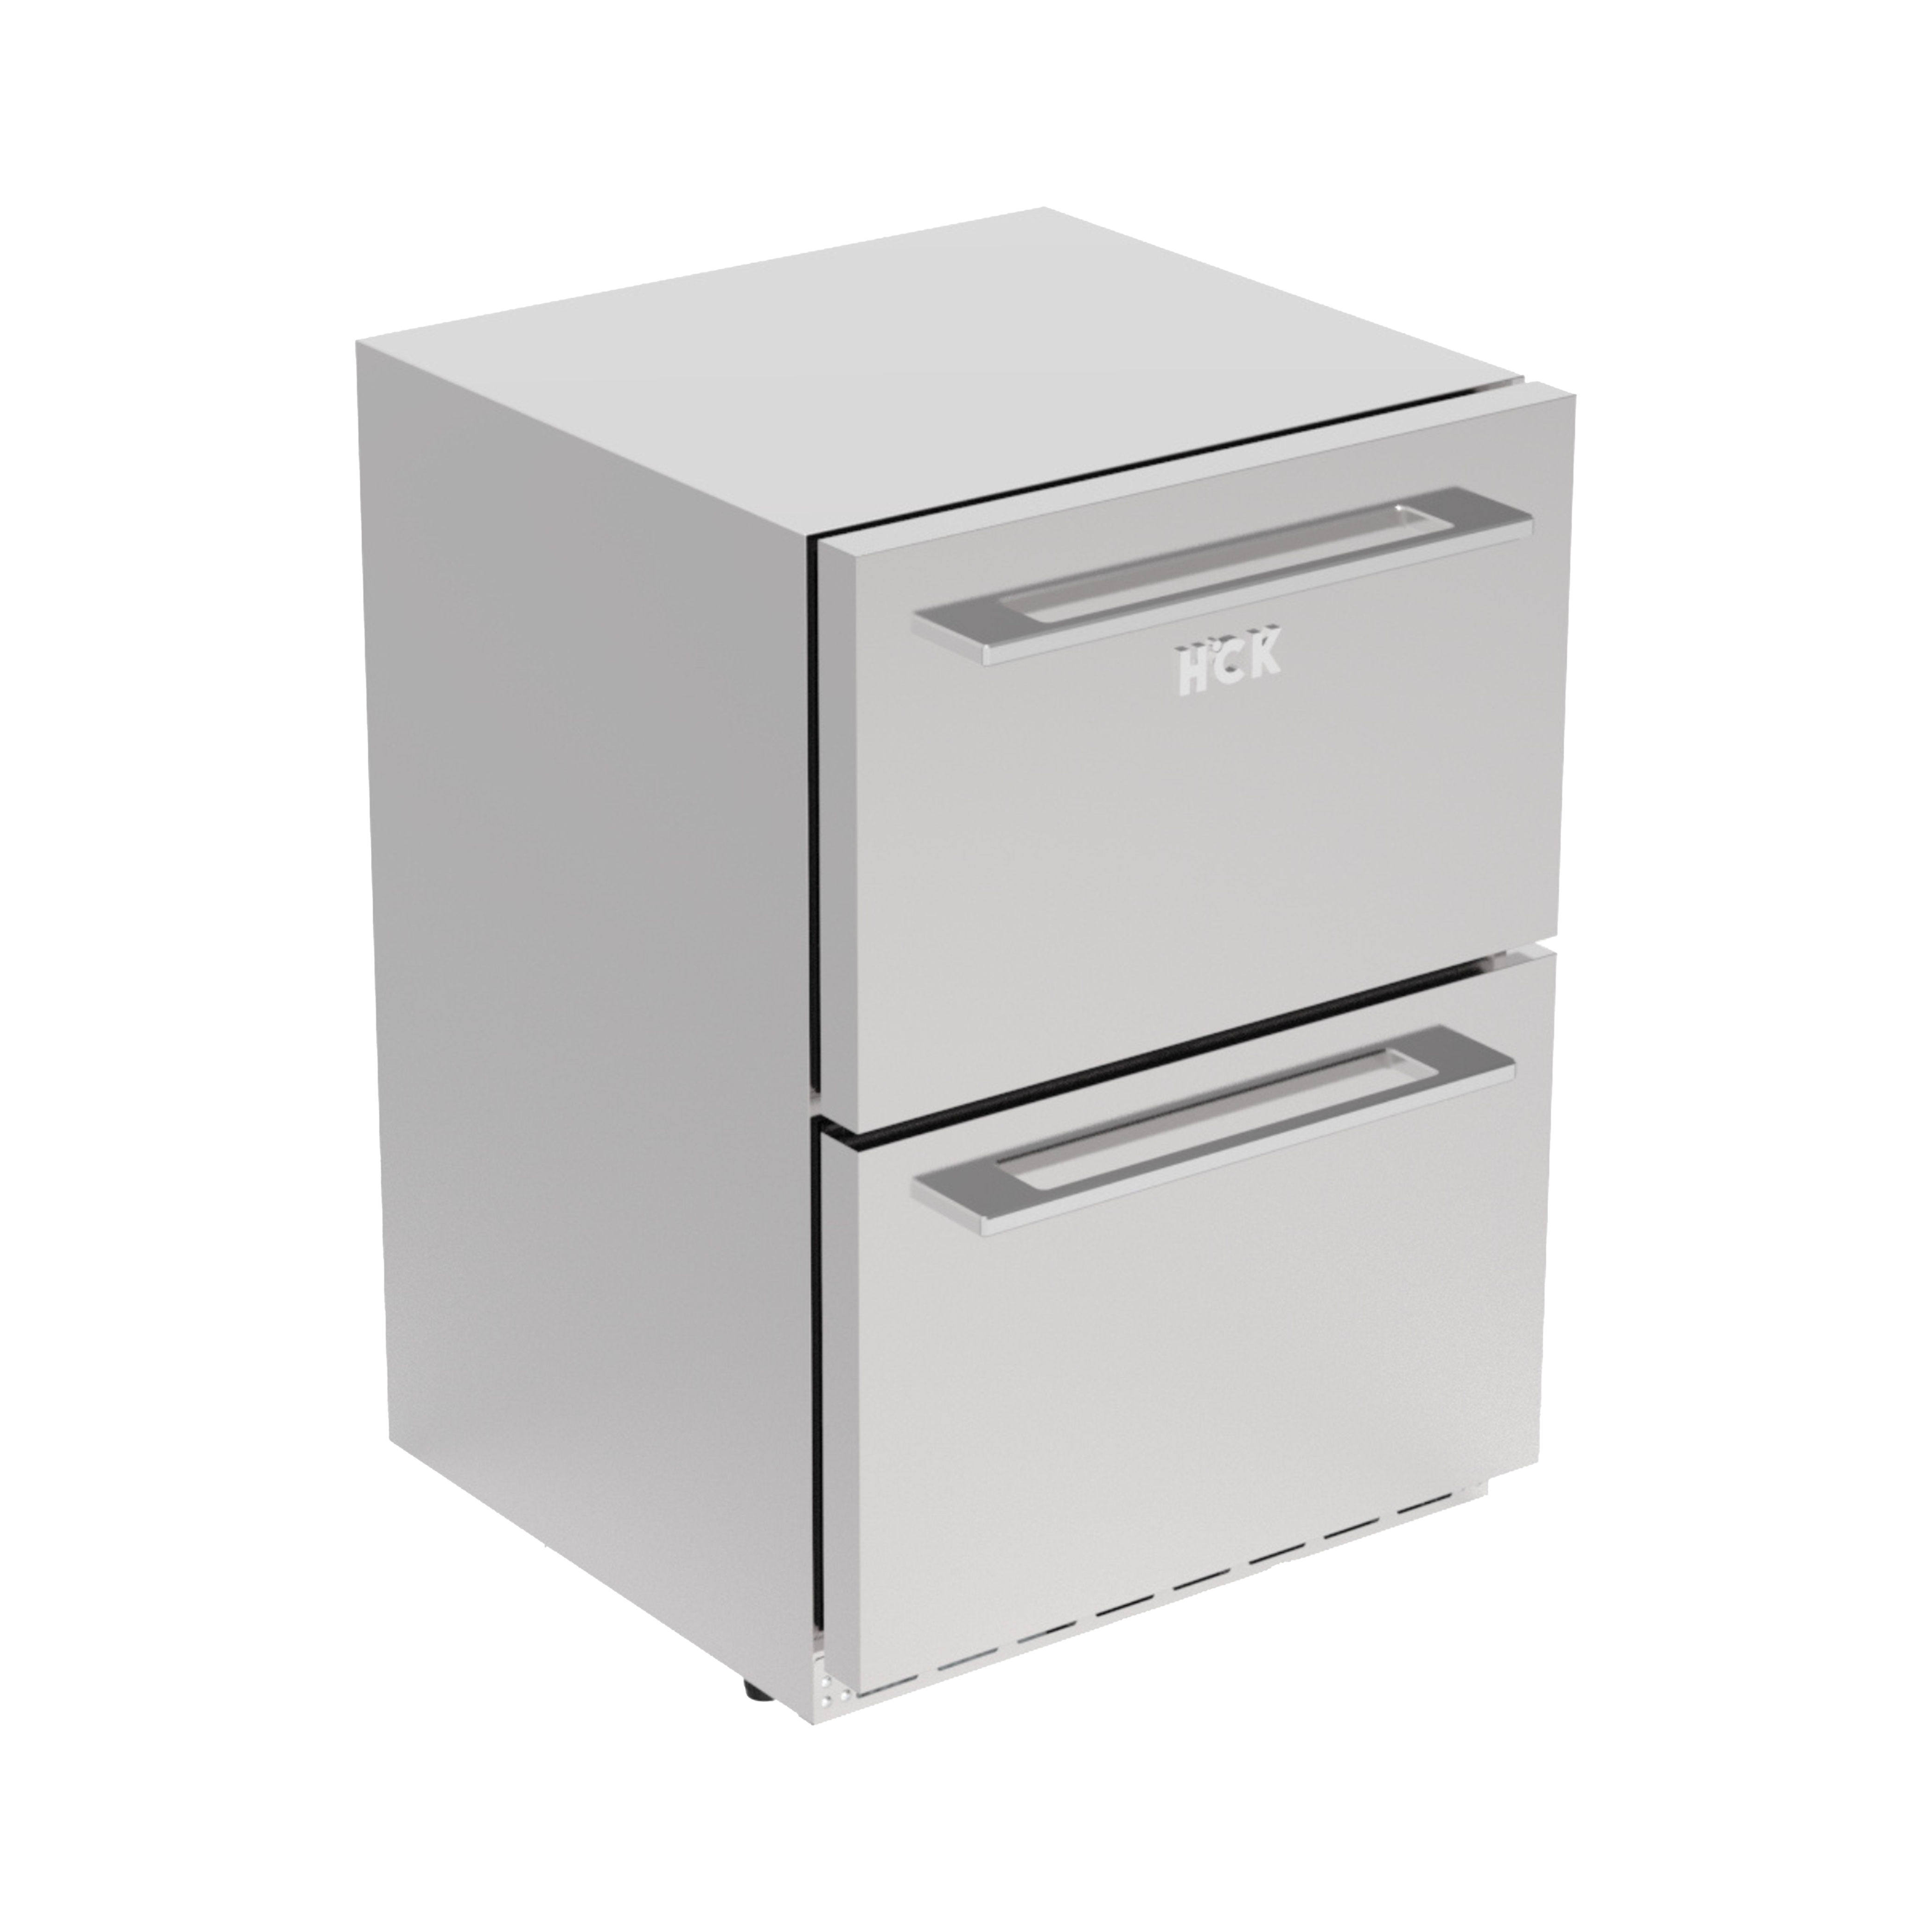 Side view of a 5.12 Cu Ft Undercounter Beverage Outdoor Refrigerator Drawer Design